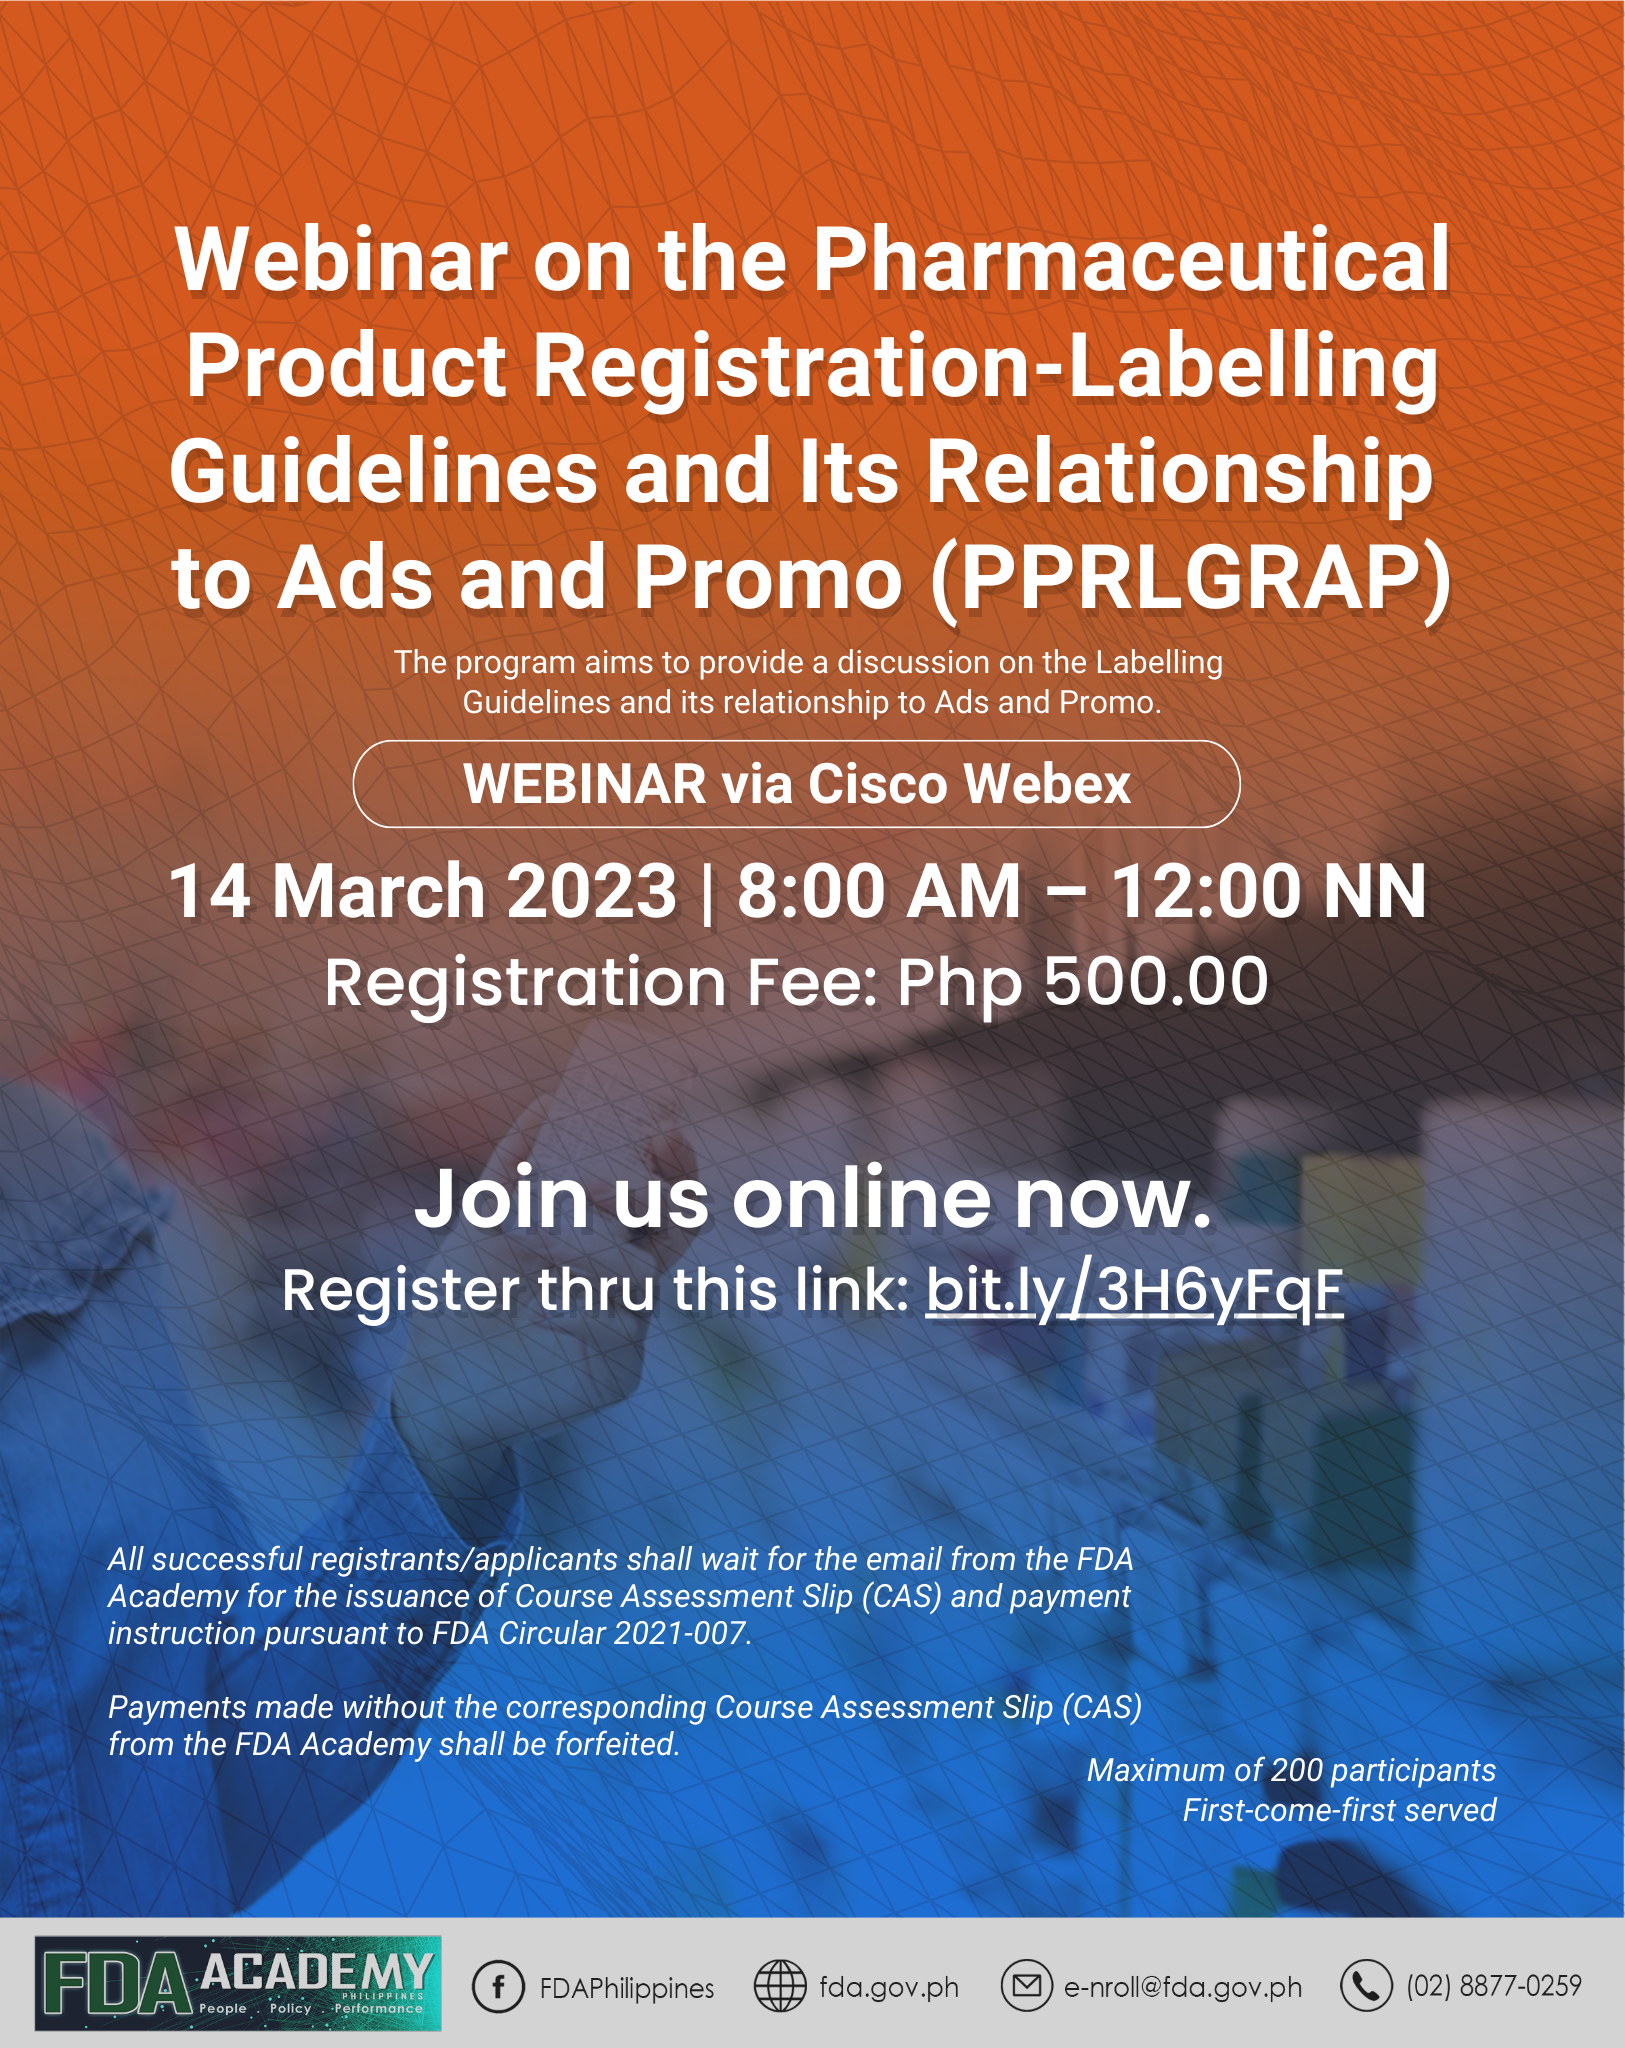 WEBINAR ON PHARMACEUTICAL PRODUCT REGISTRATION – LABELLING GUIDELINES AND ITS RELATIONSHIP IN ADS AND PROMO (PPRLGRAP)